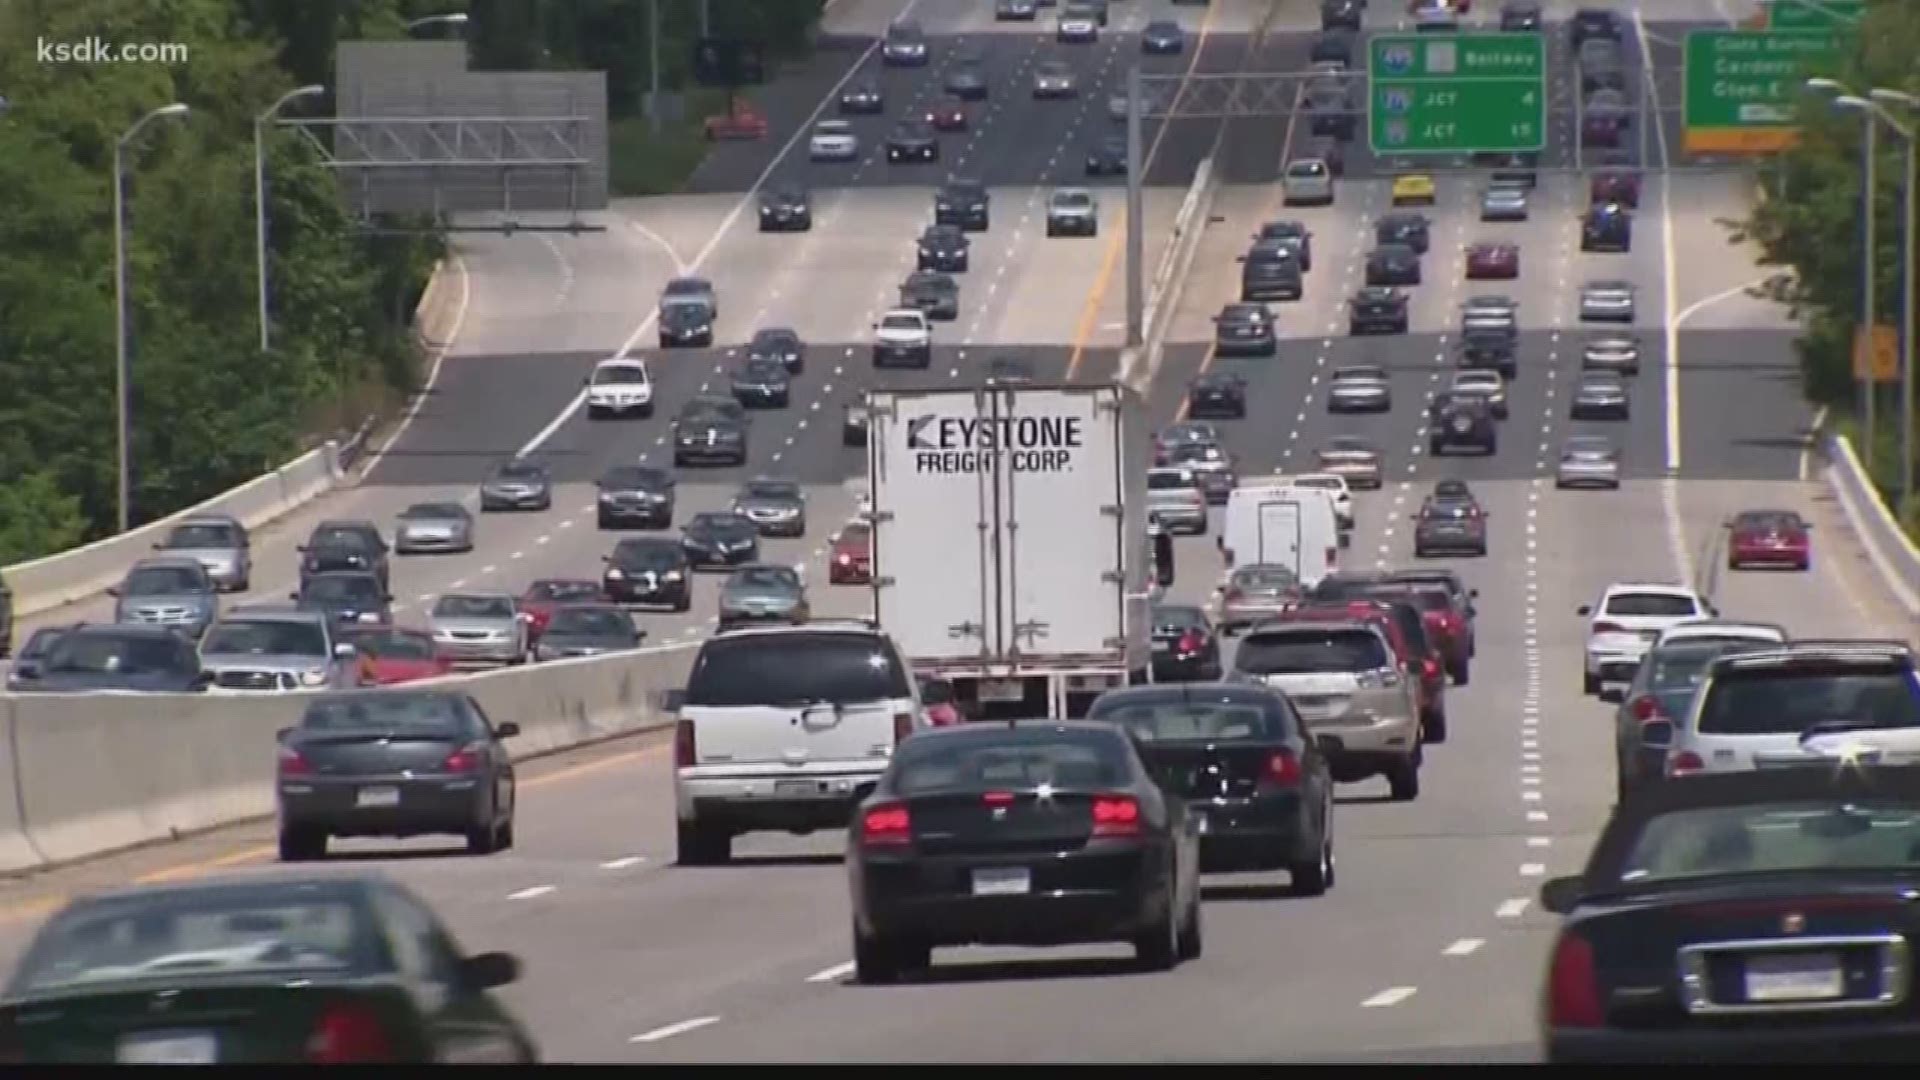 This Memorial Day weekend is expected to be one for the record books for travelers, despite gas prices approaching $3 a gallon.